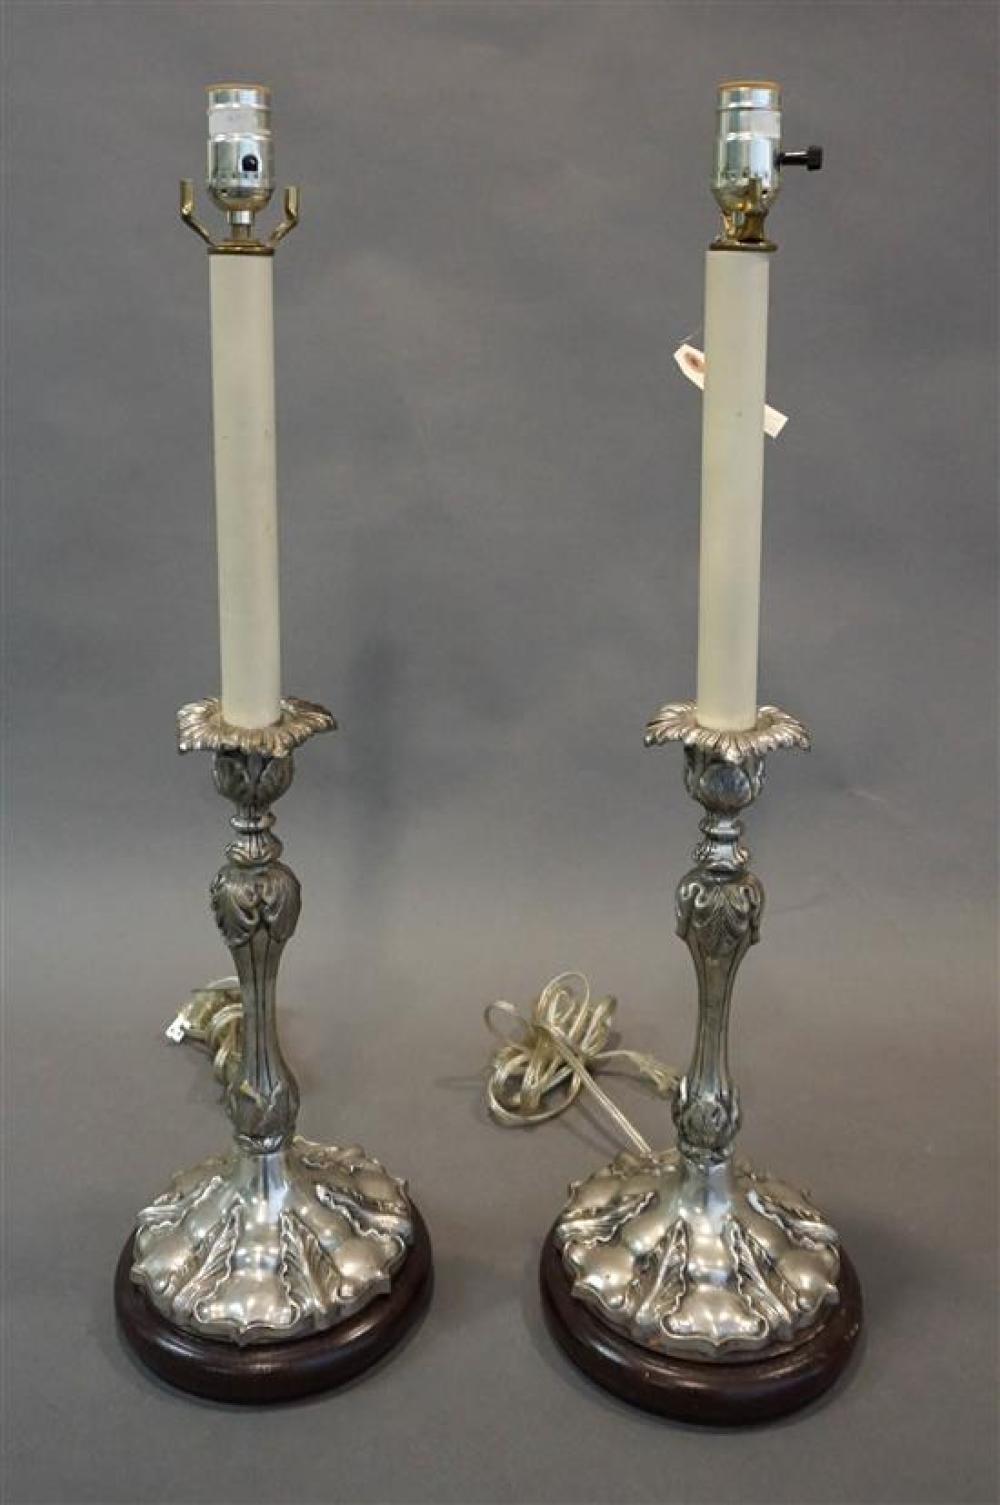 PAIR OF ROCOCO STYLE SILVERED METAL